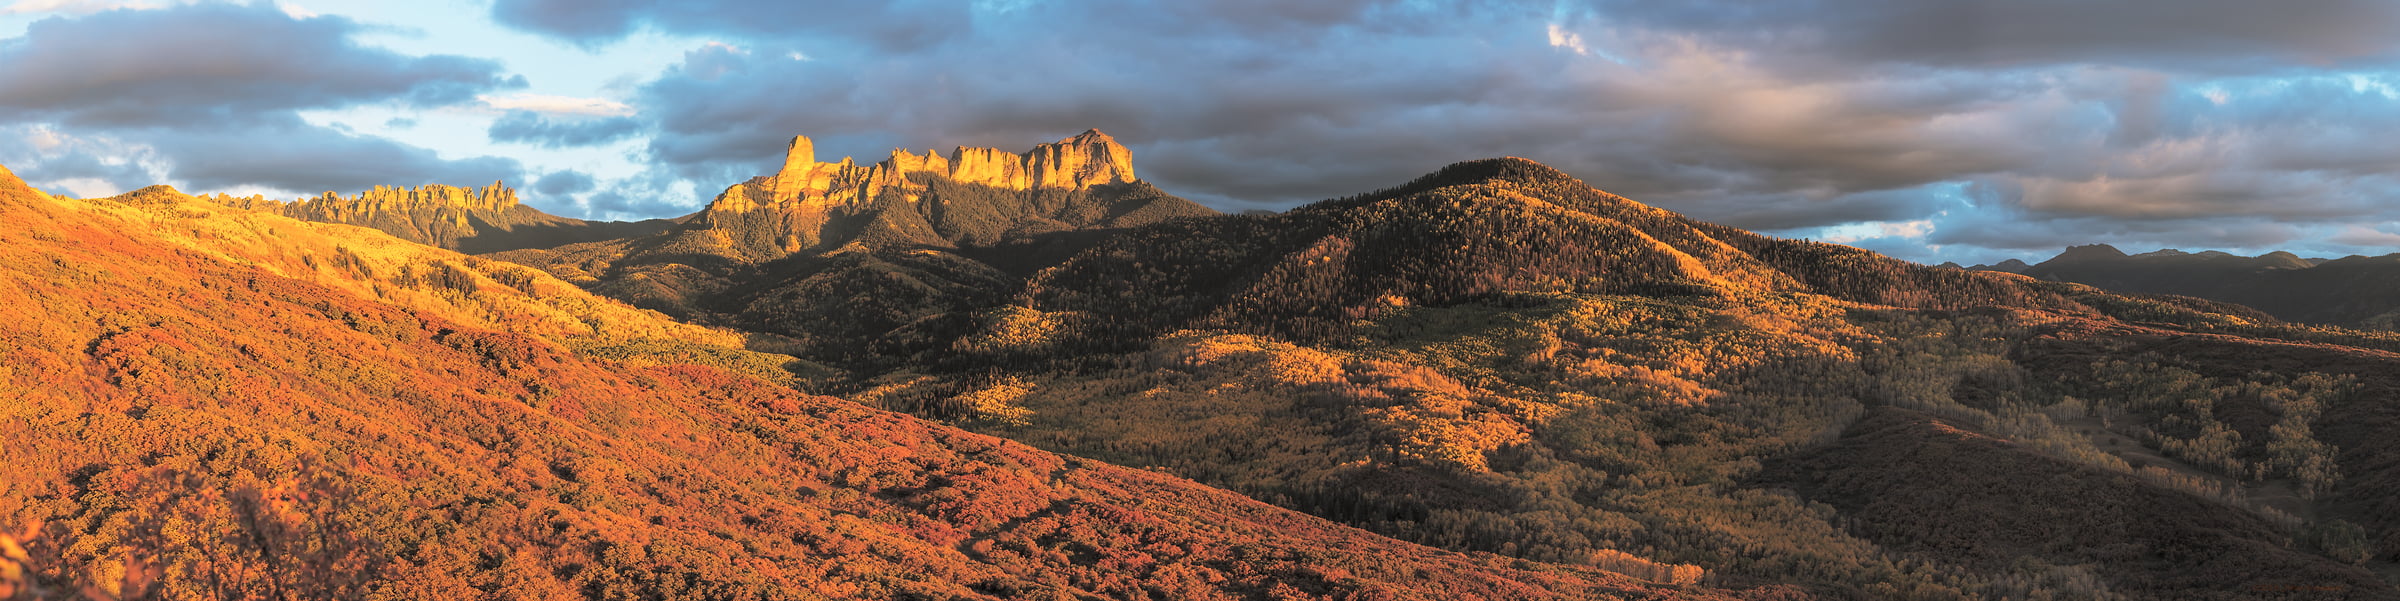 1,118 megapixels! A very high resolution, panorama photo of forested hills and mountains in Colorado at sunset; landscape photograph created by John Freeman in Owl Creek Range, Ridgeway, Colorado